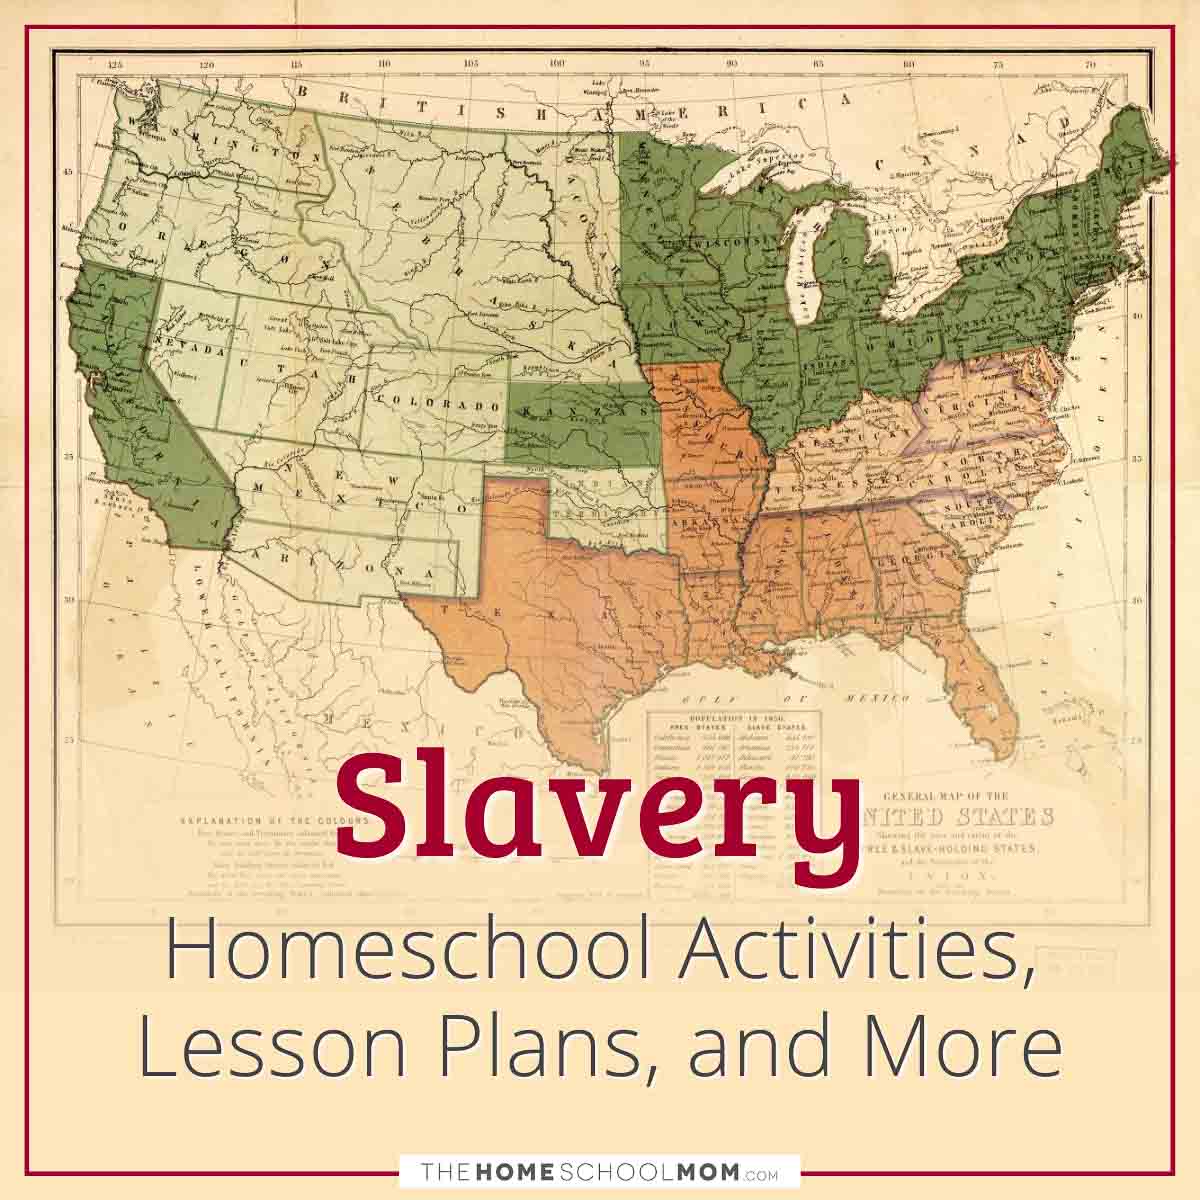 Slavery Homeschool Activities, Lesson Plans, and More.